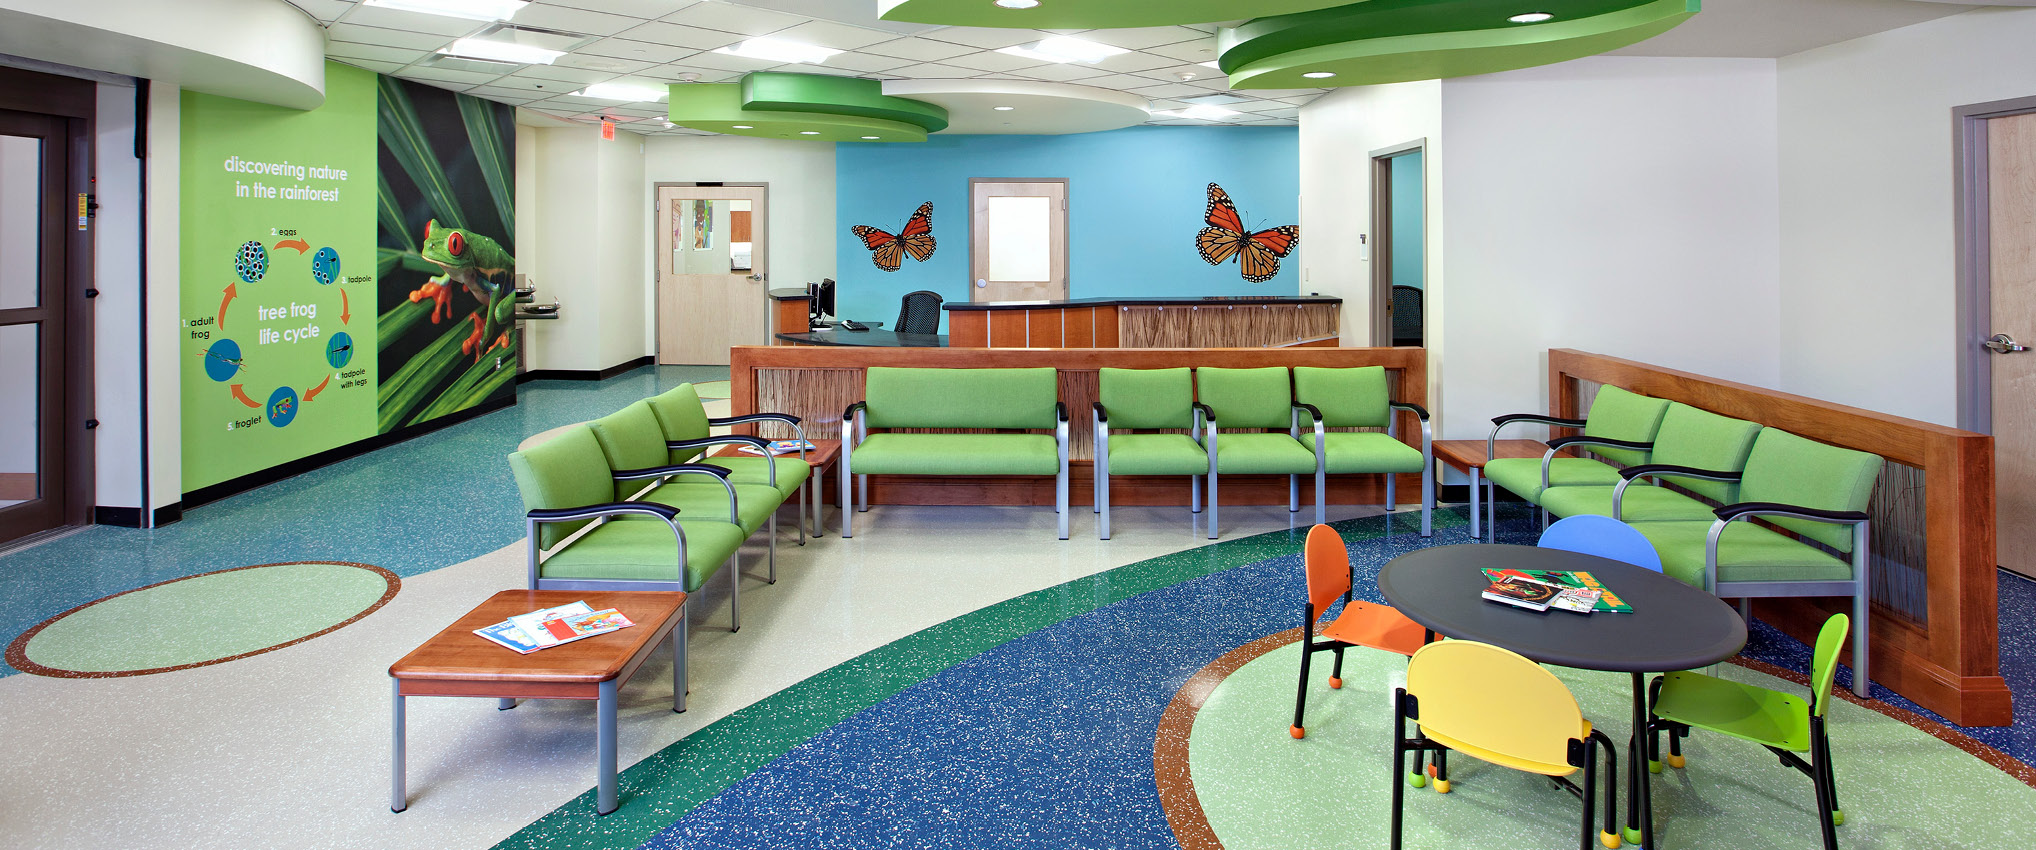 HKS Receives 2011 Brightest Idea Interior Design Excellence Award for VCU Health Adult and Pediatric Emergency Department